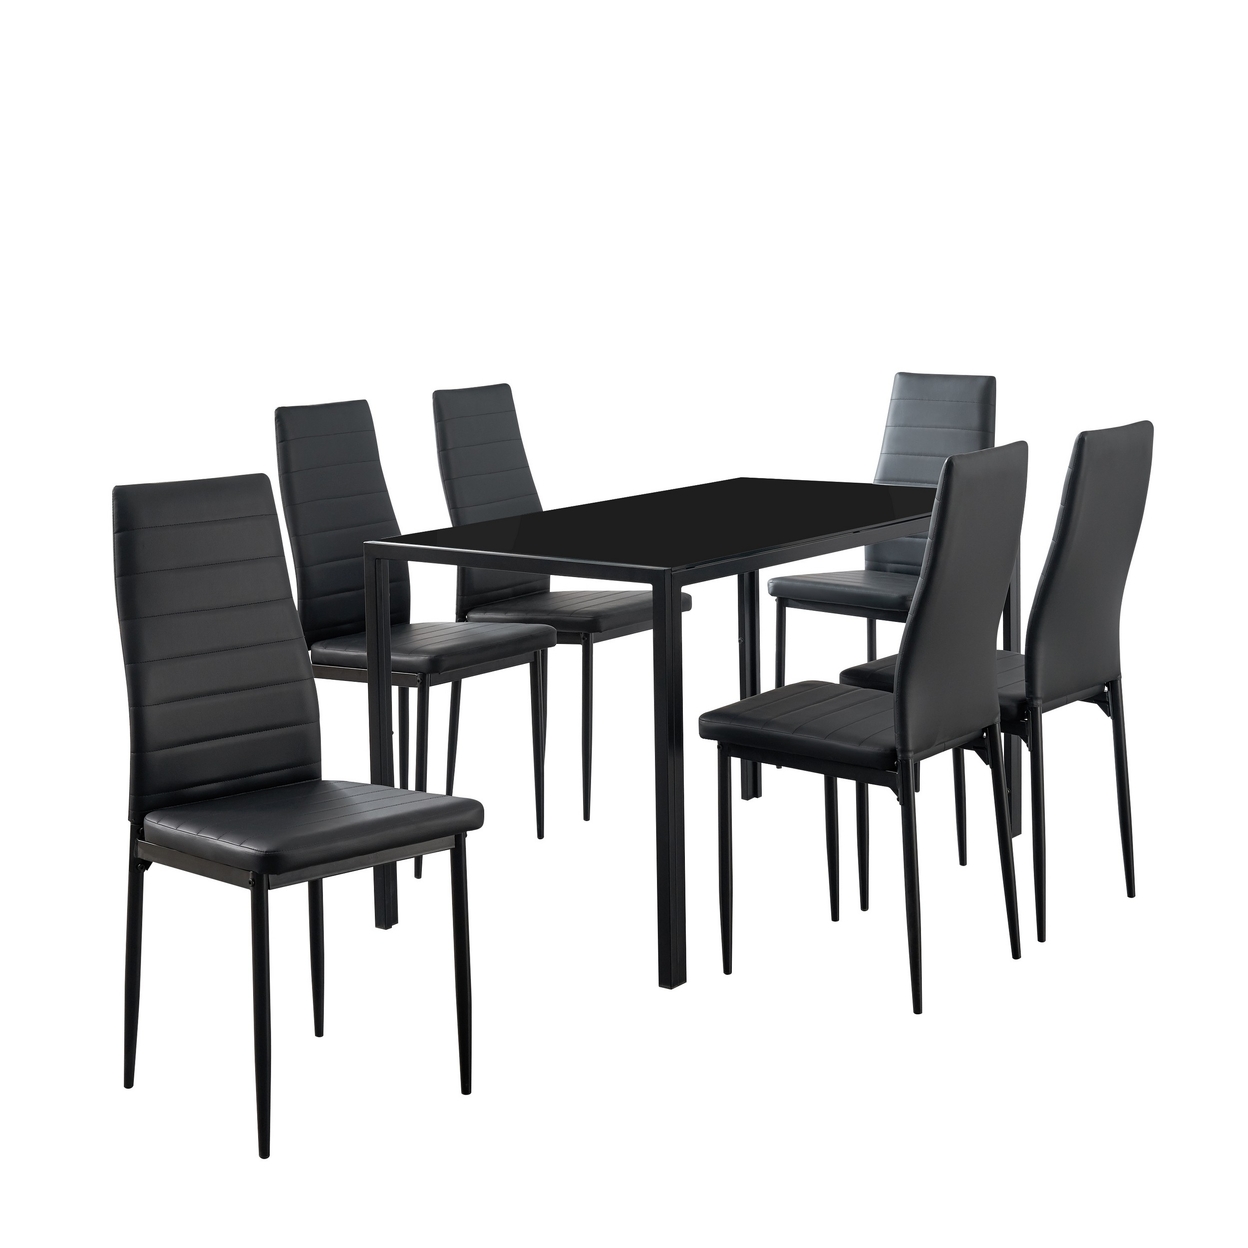 Ned 7 Piece Dining Set, Black Faux Leather Tall Back Chairs, Metal Table- Saltoro Sherpi